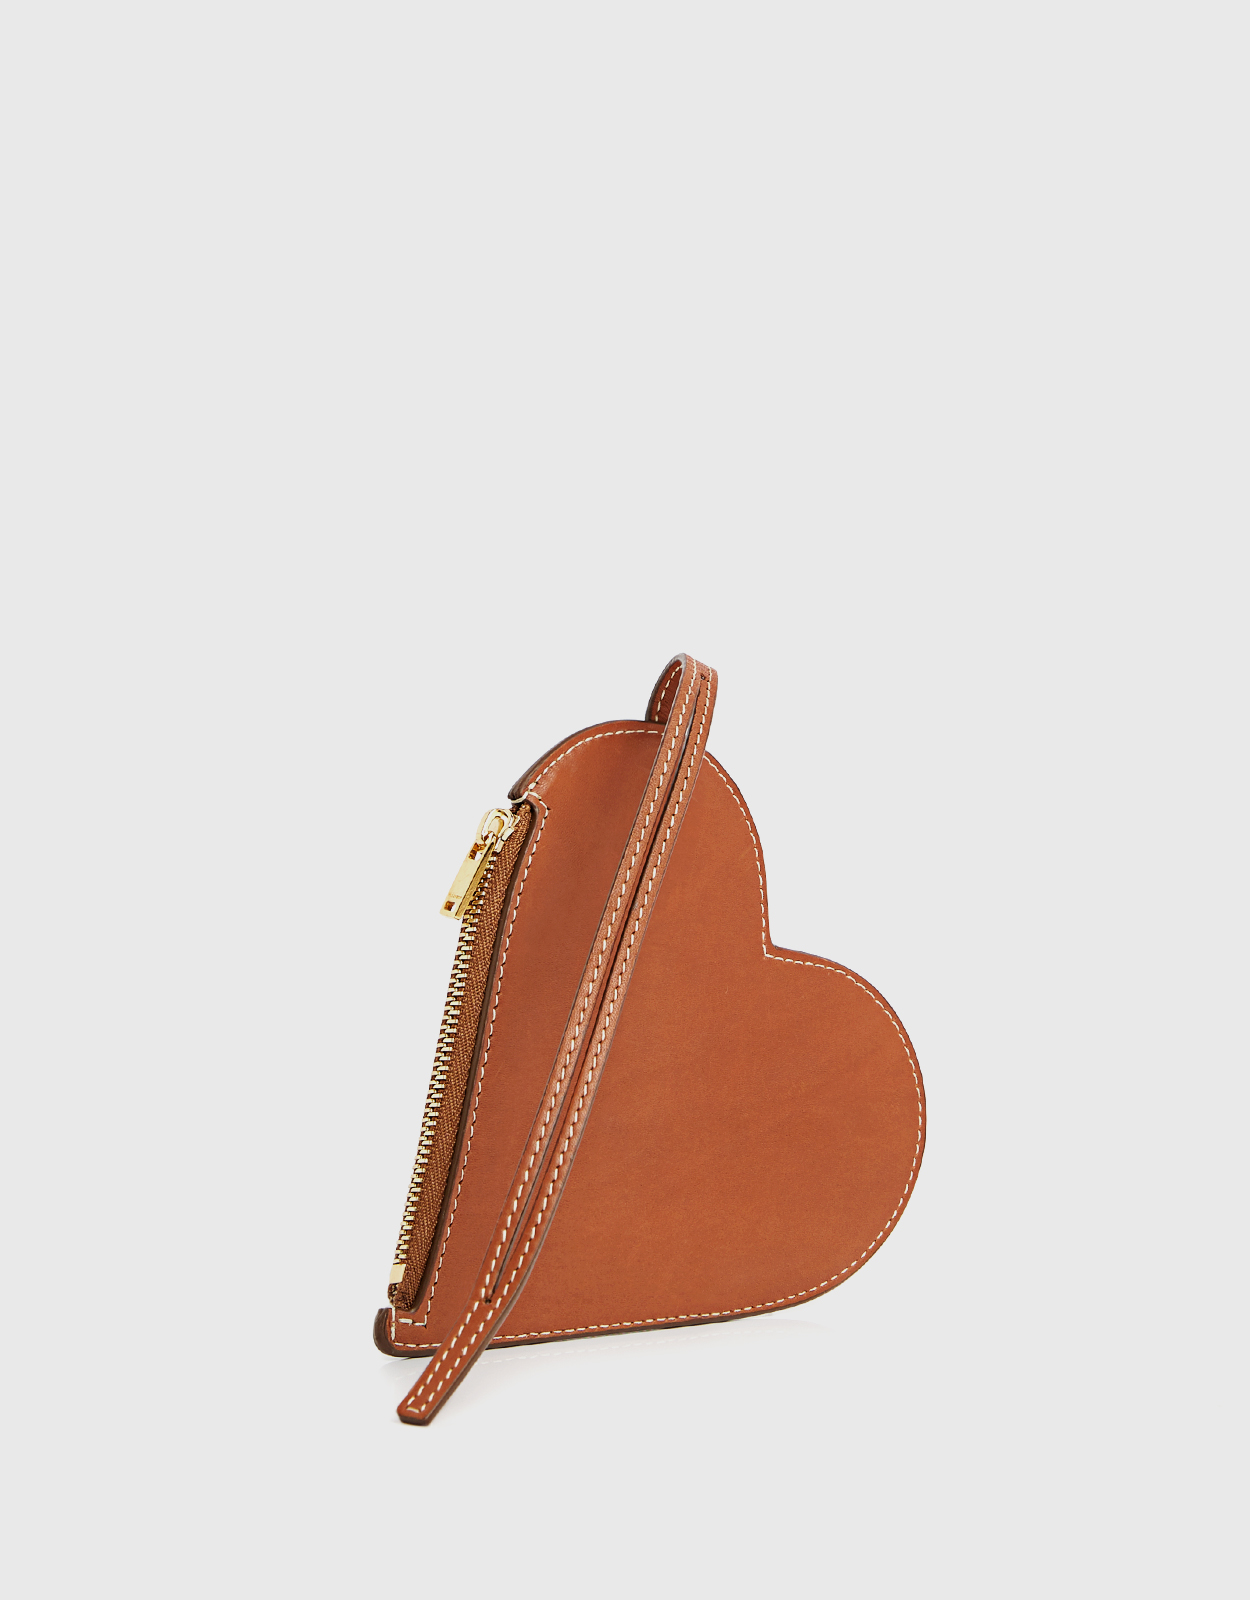 Marc Jacobs Heart-Shaped Leather Bag in Red